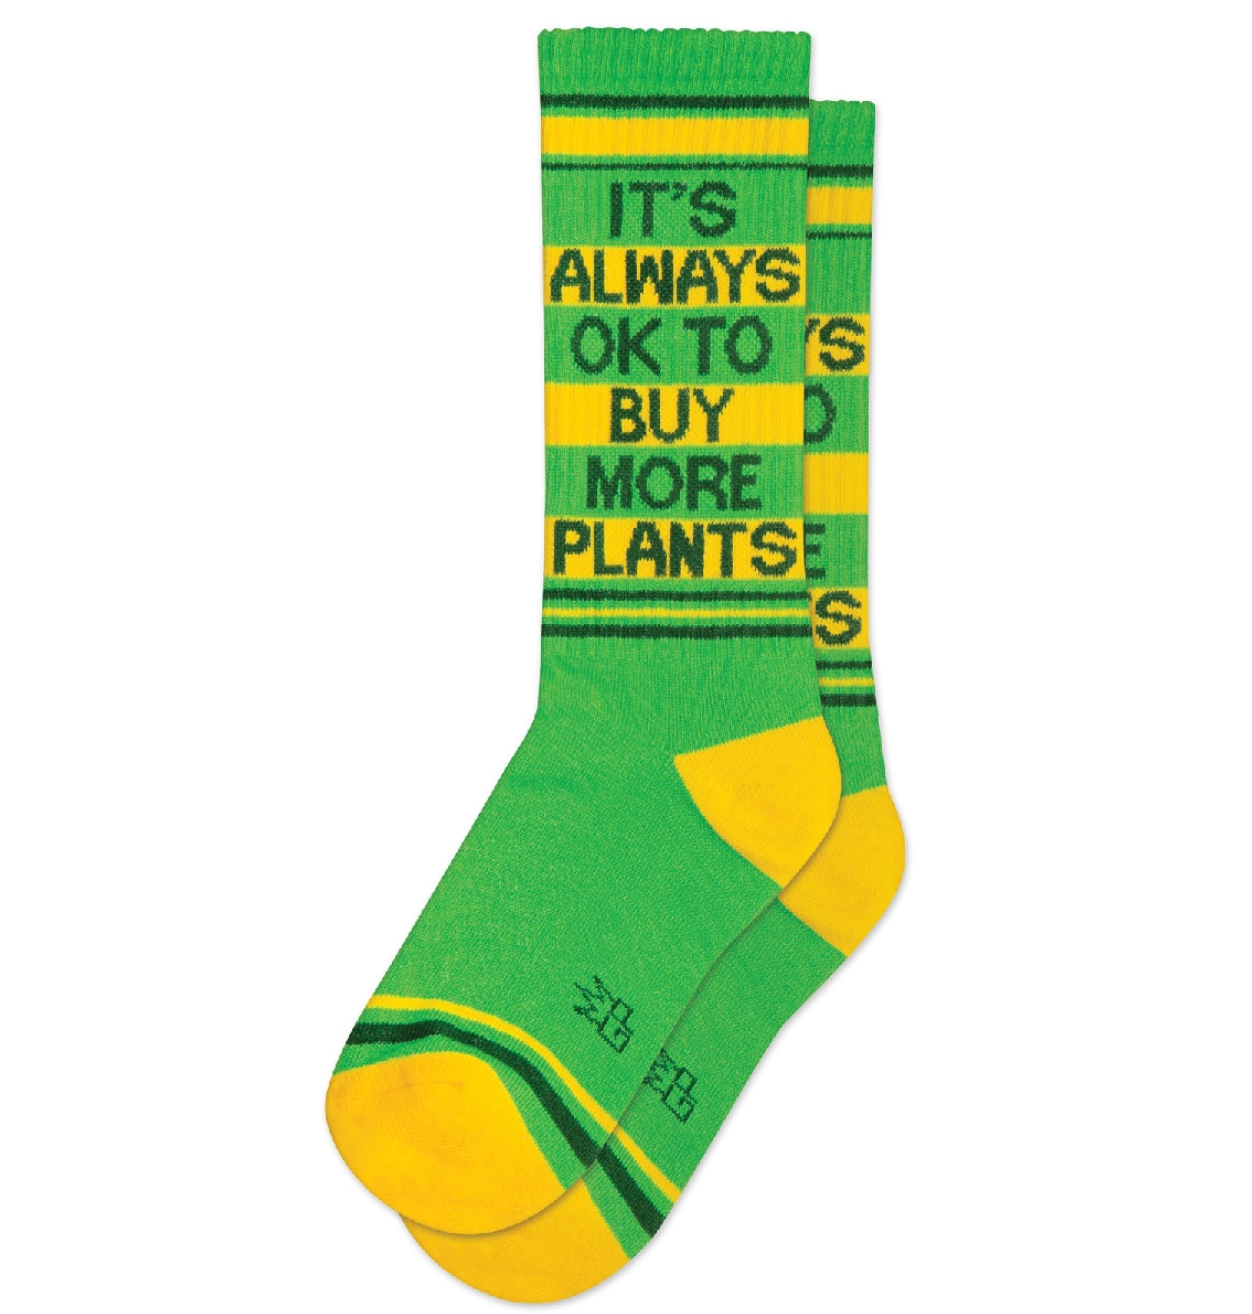 It's Always OK to Buy More Plants Gym Socks Unisex by Gumball Poodle Sold at Le Monkey House